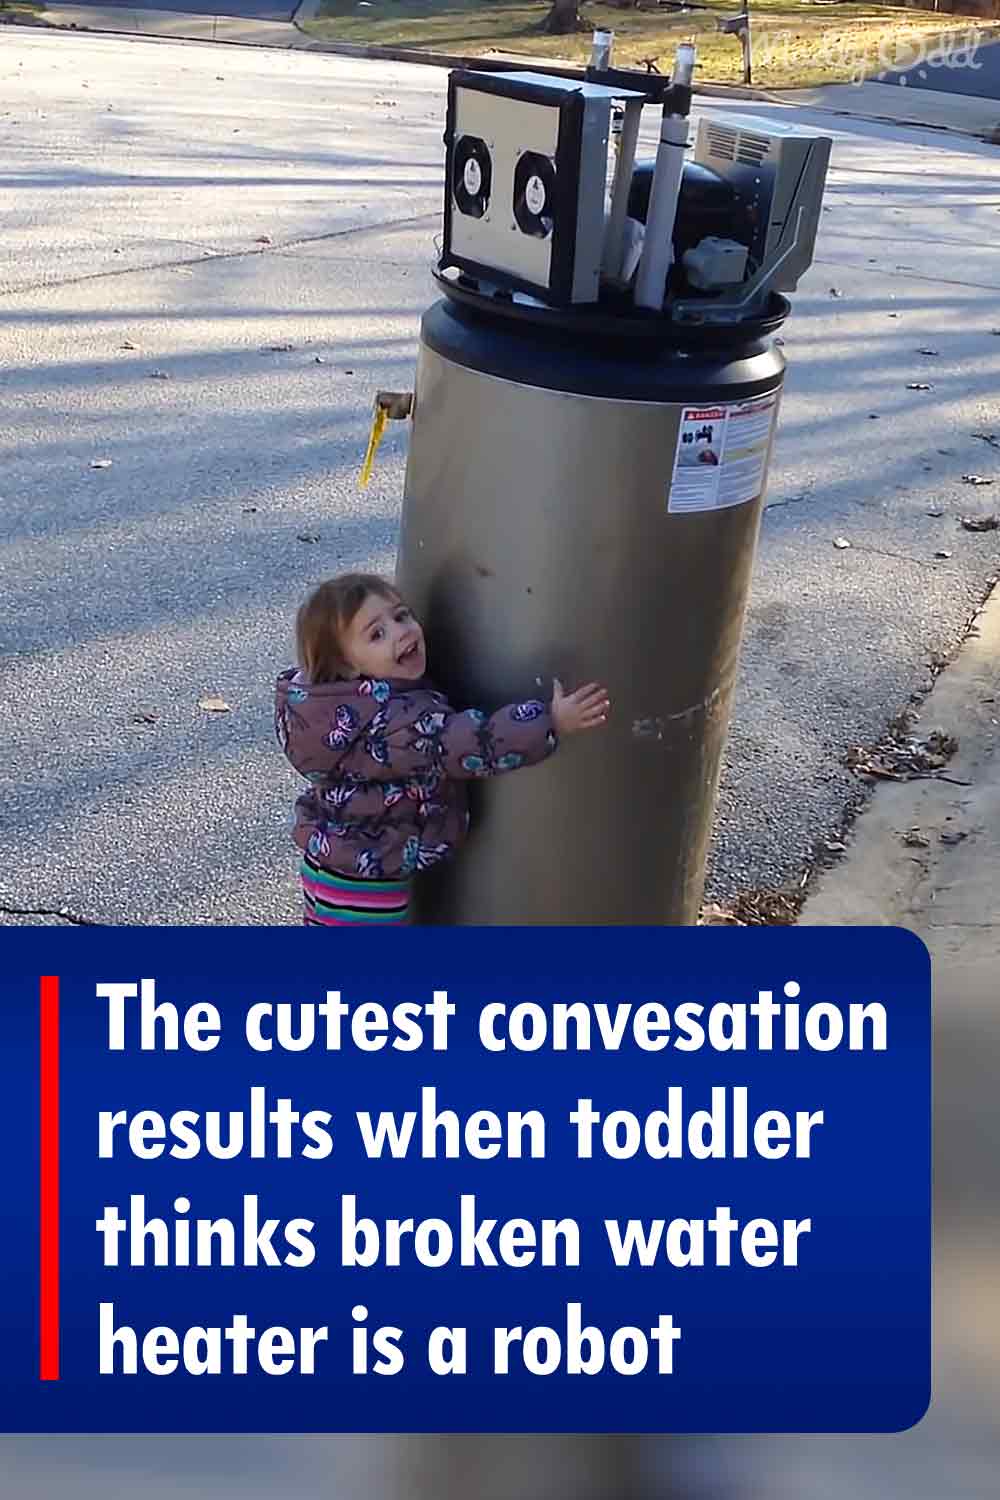 The cutest conversation results when toddler thinks broken water heater is a robot